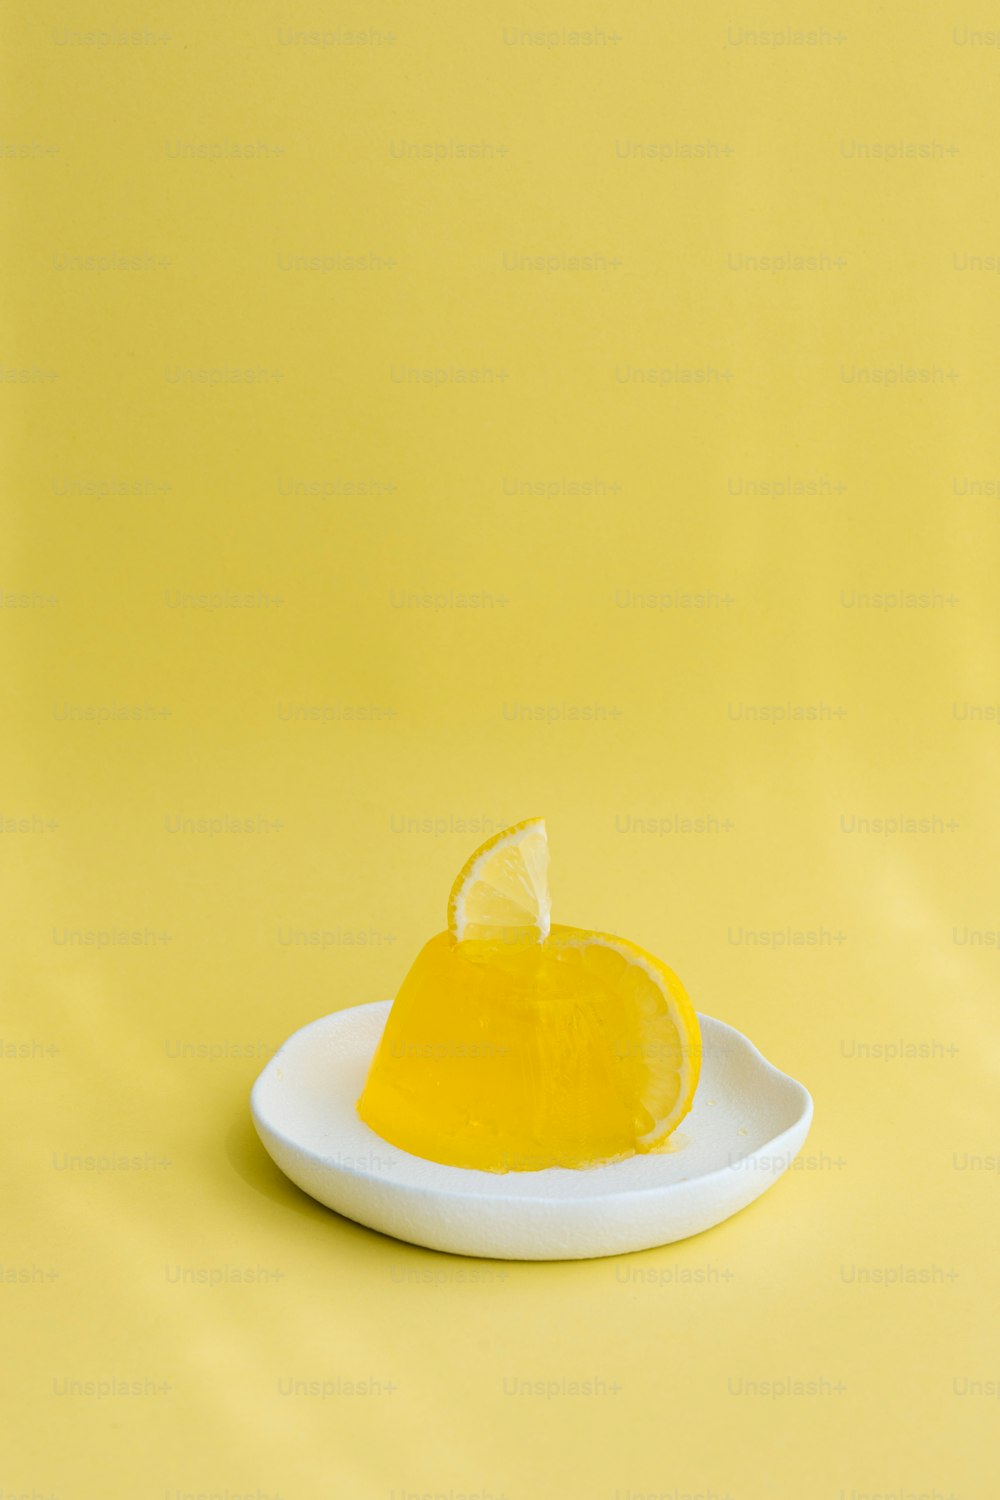 a slice of lemon on a plate on a yellow background